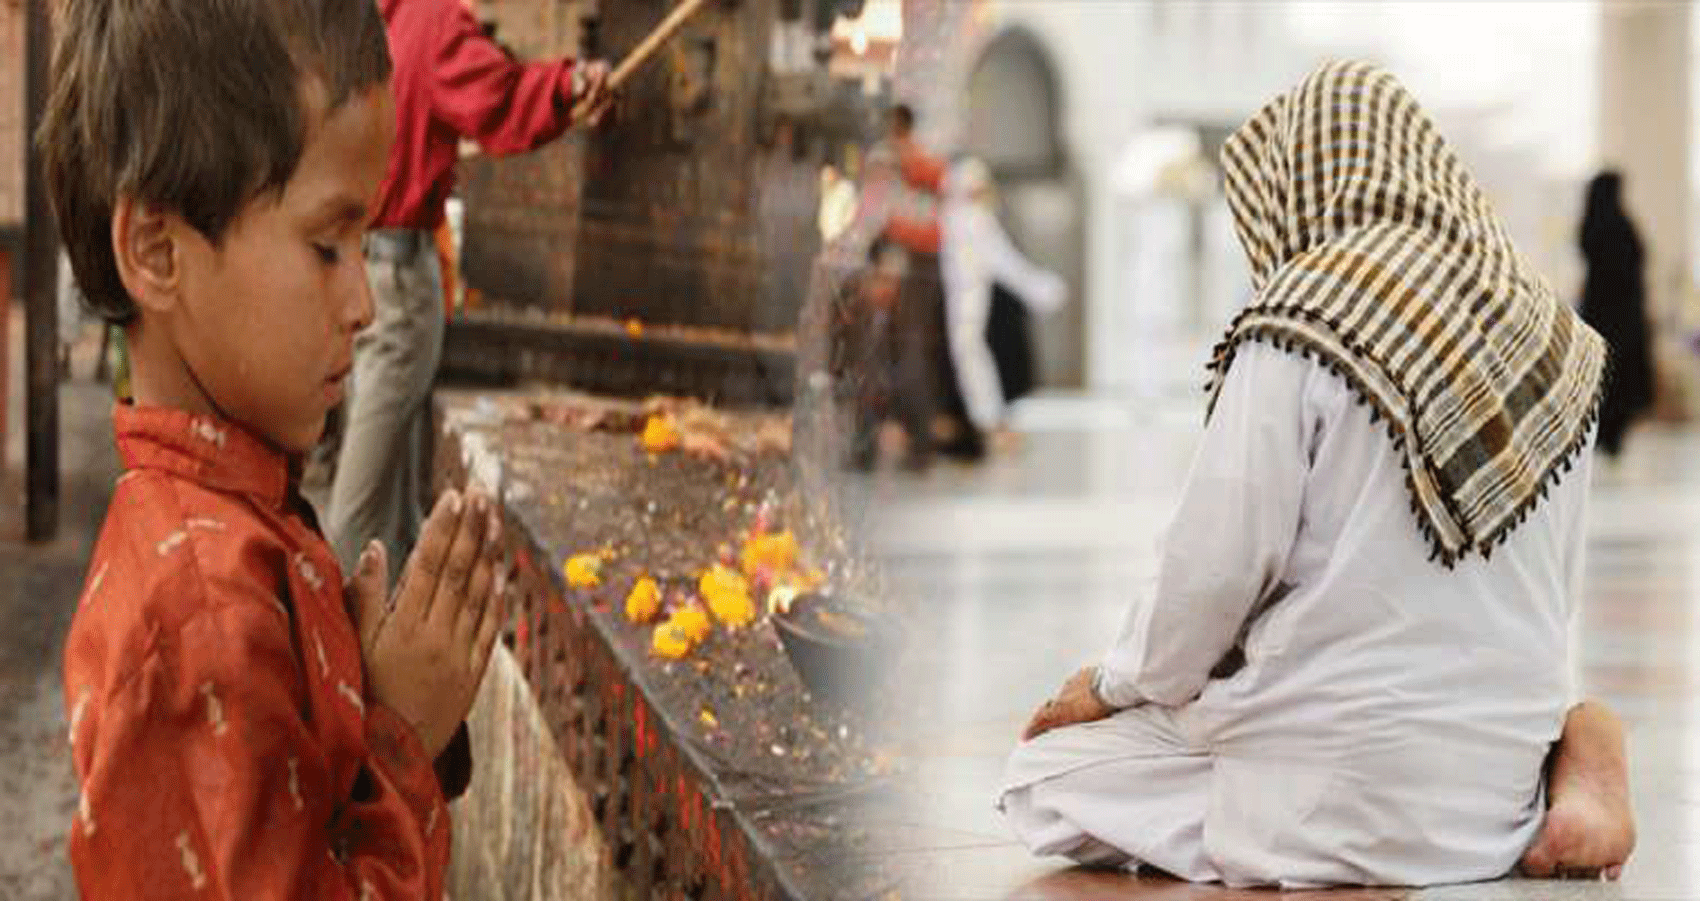 Purshottam Mas and Ramzan will be celebrated together this year